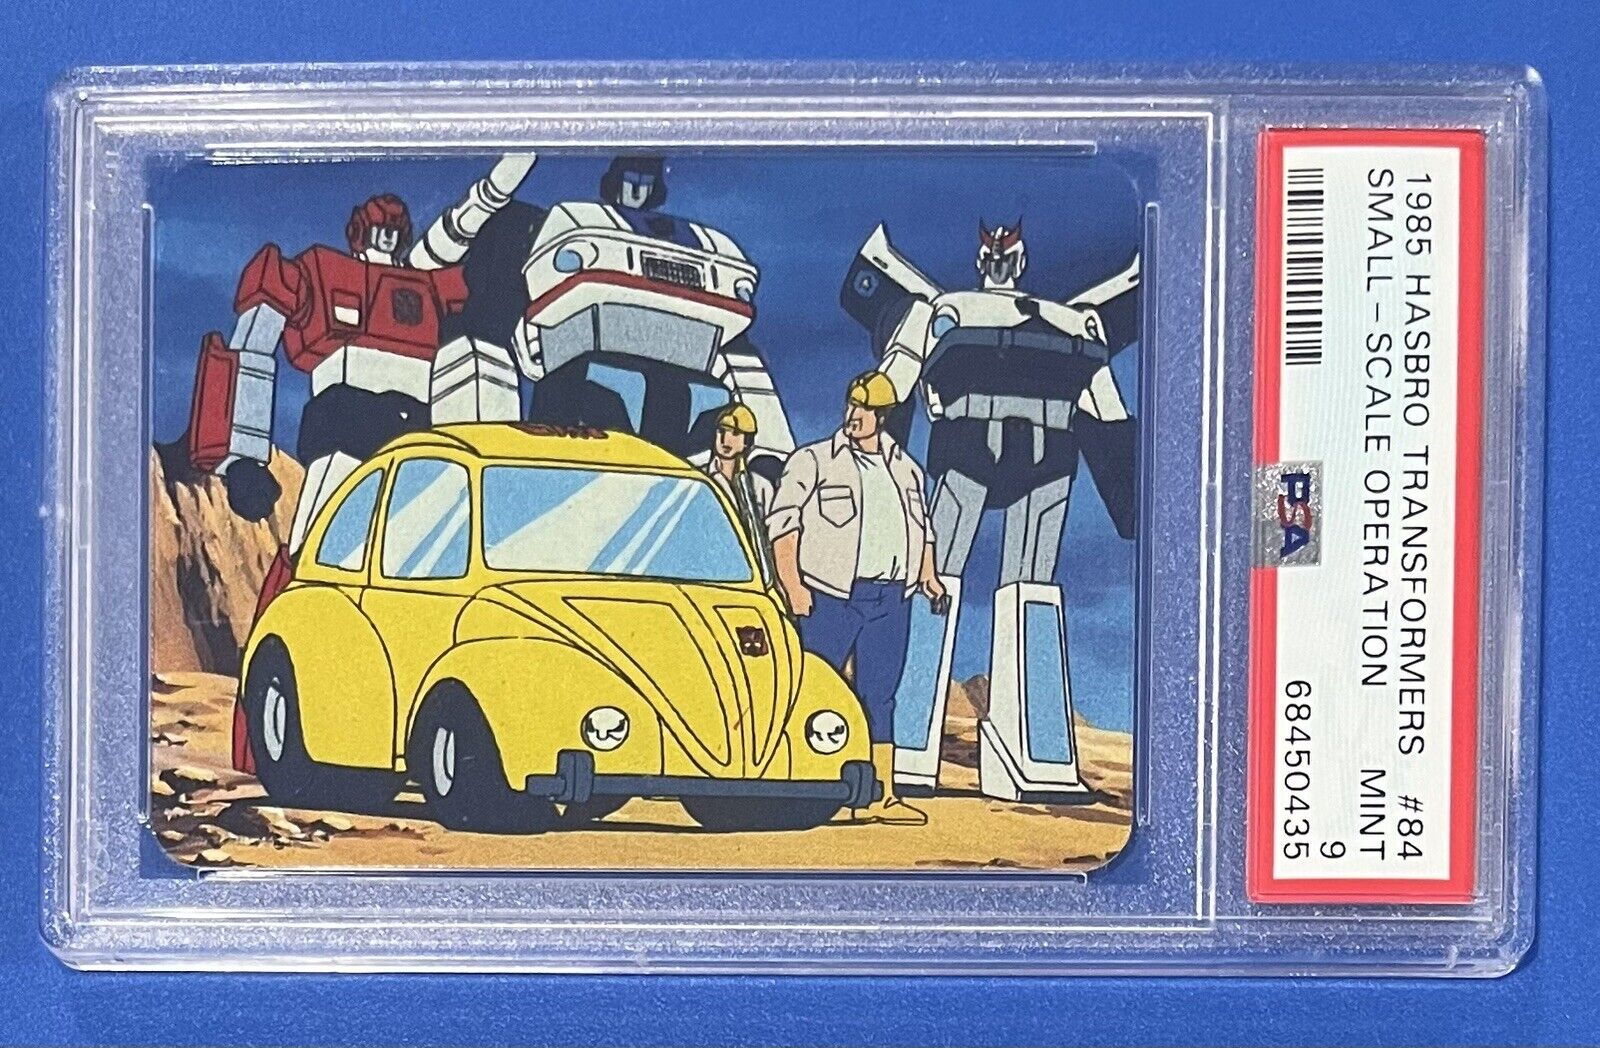 1985 Hasbro Transformers SMALL-SCALE OPERATION card #84 🟡 PSA 9 Mint